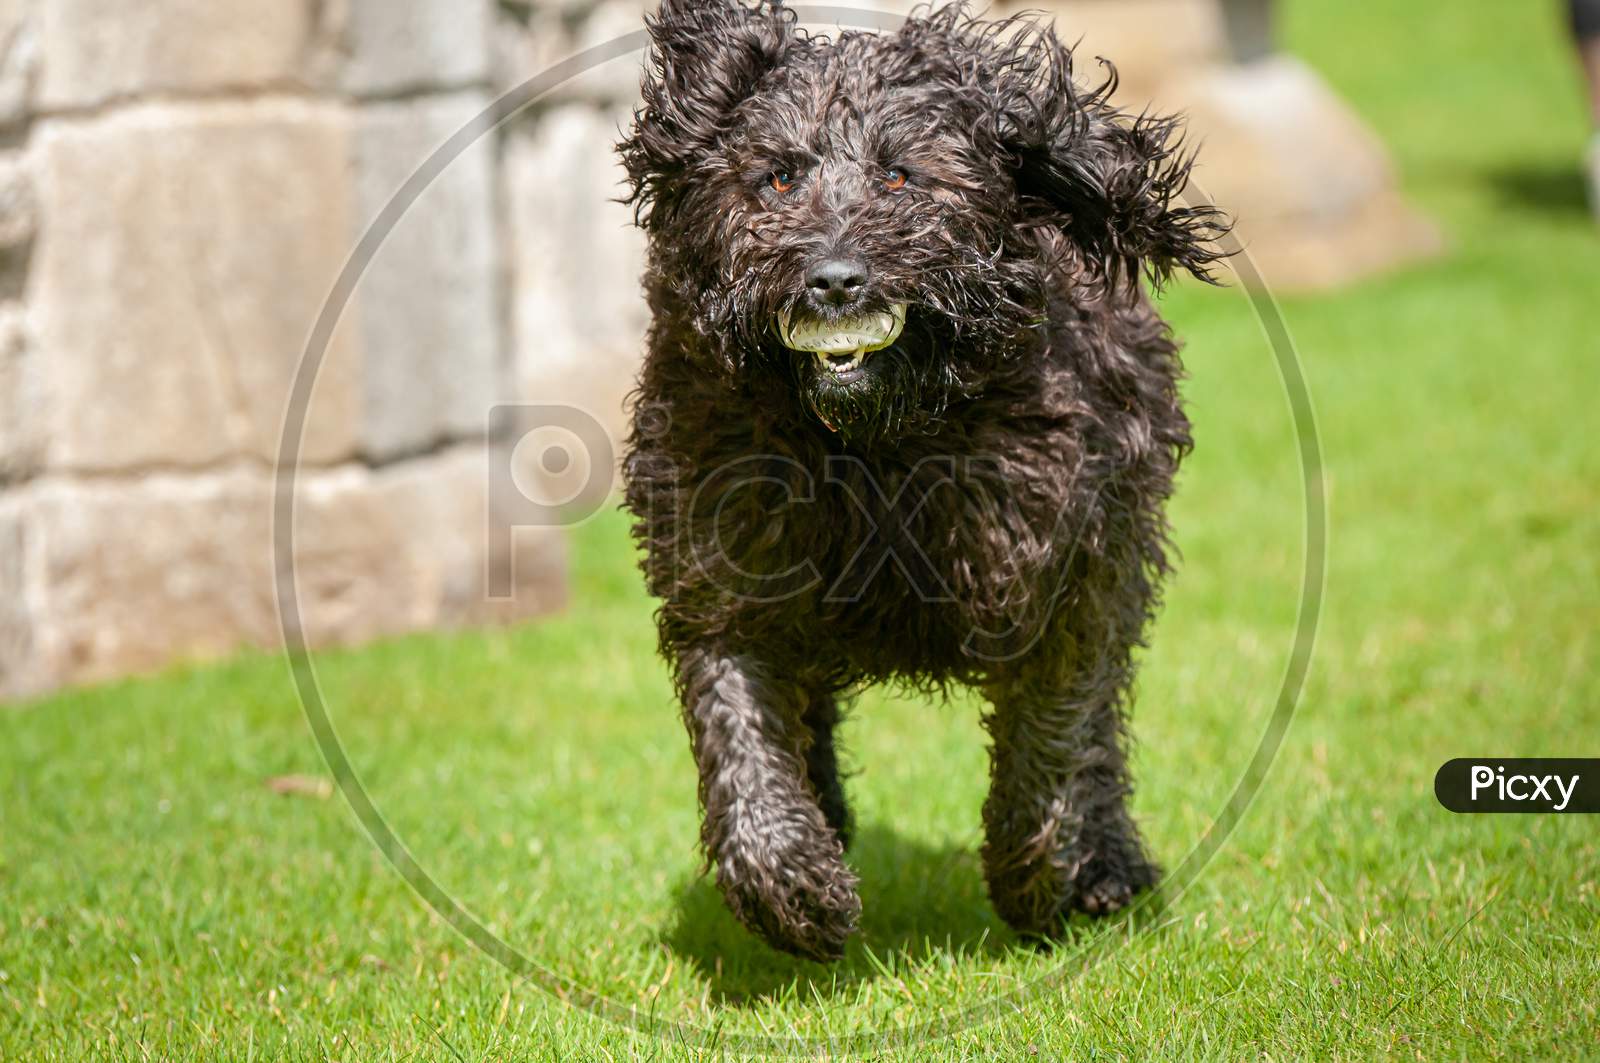 Black Labradoodle Dog Making Eye Contact While Running With A Ball In Its Mouth